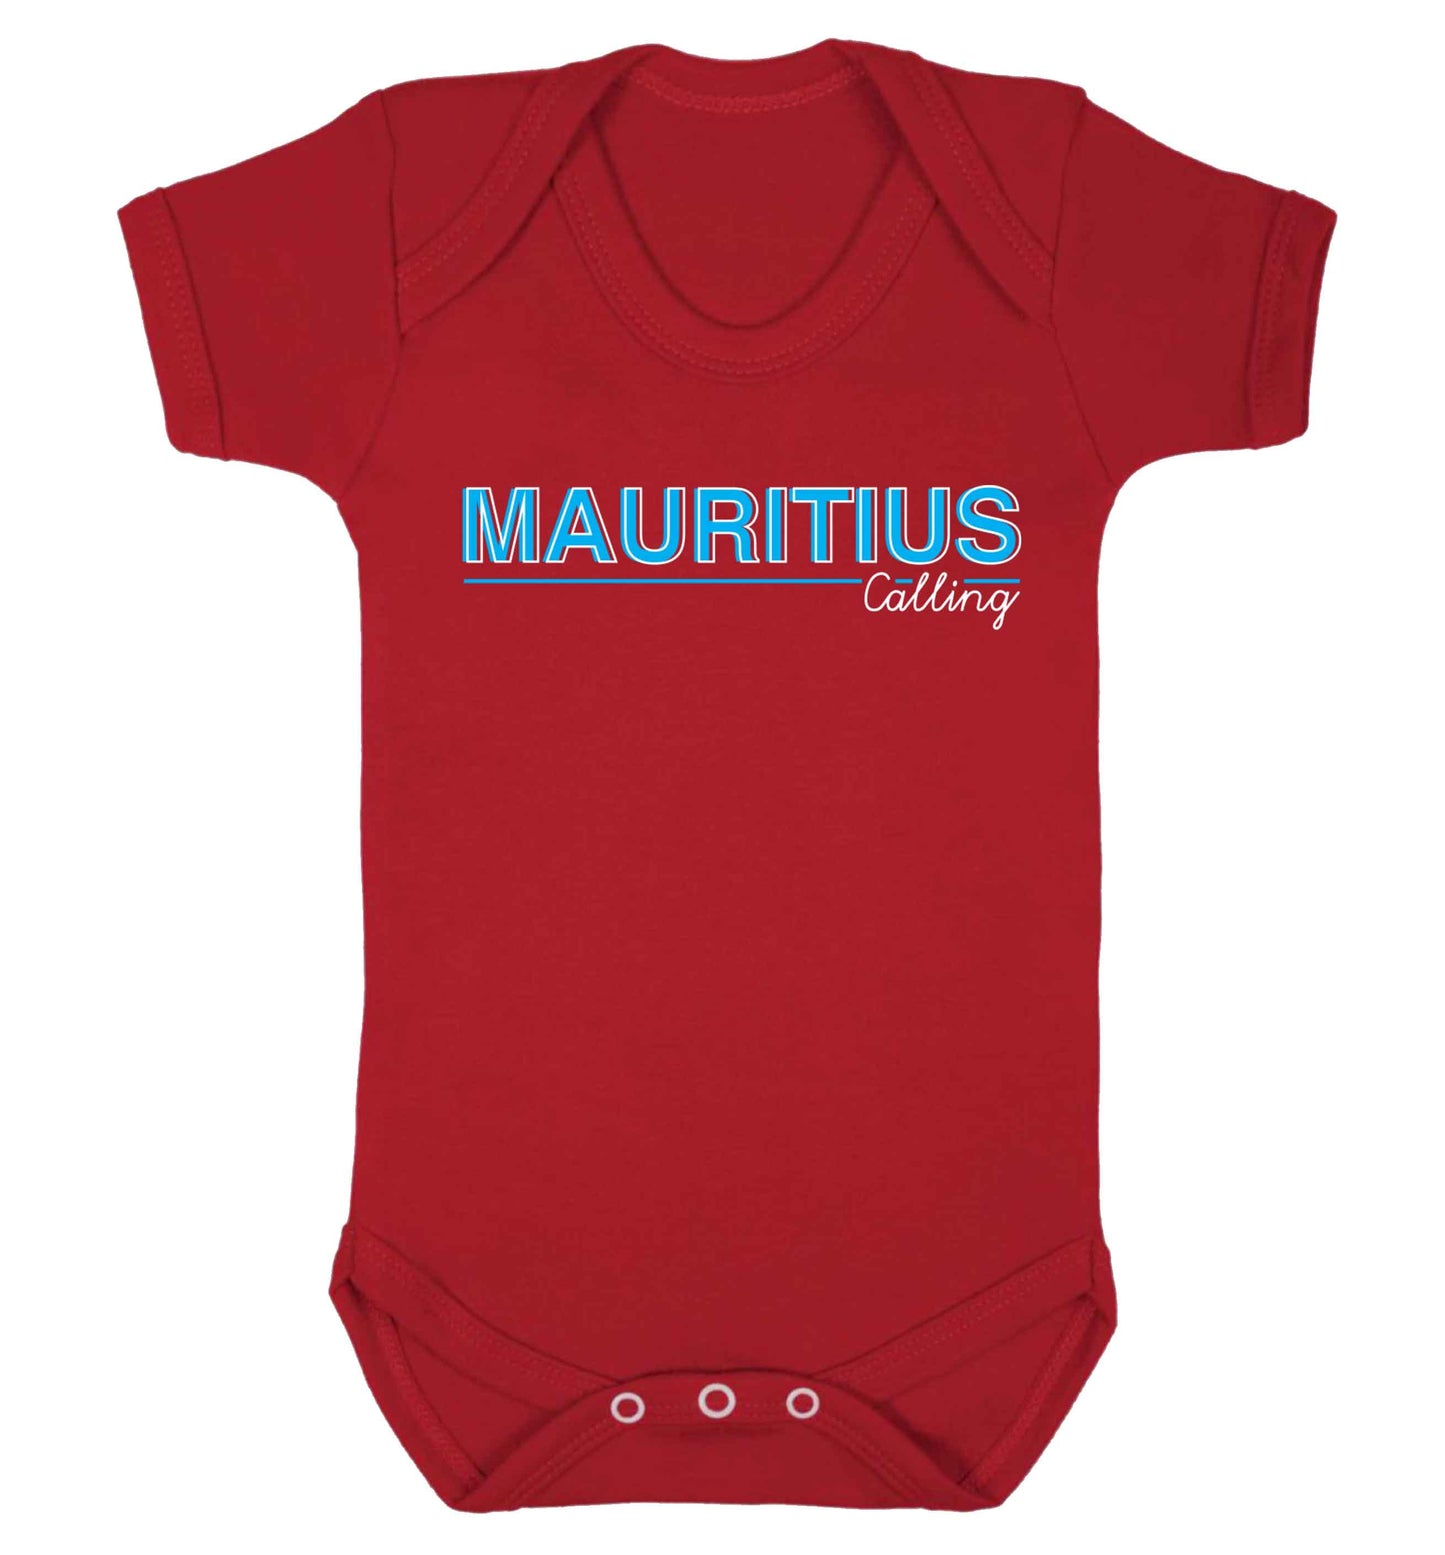 Mauritius calling Baby Vest red 18-24 months